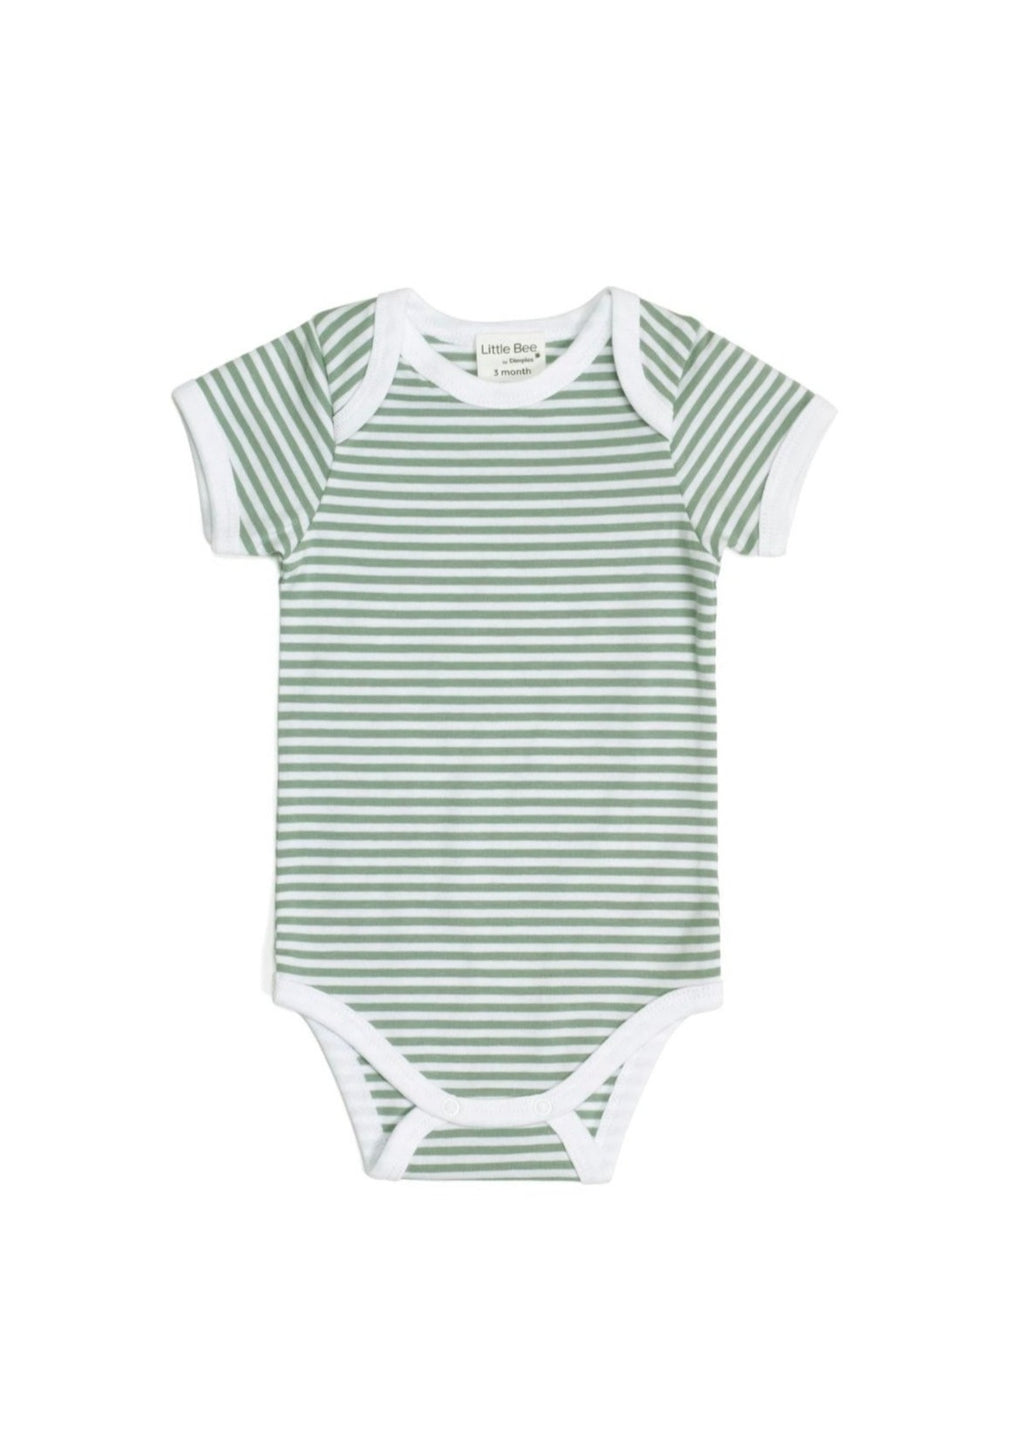 Cotton Bodysuit - Sage Stripe, by Little Bee Watch a child explore a world of wonder that’s evergreen - fresh and new, yet everlasting. Your little gardener can offer a lesson to us all in the magic of time spent in nature to inspire, delight and bring joy.